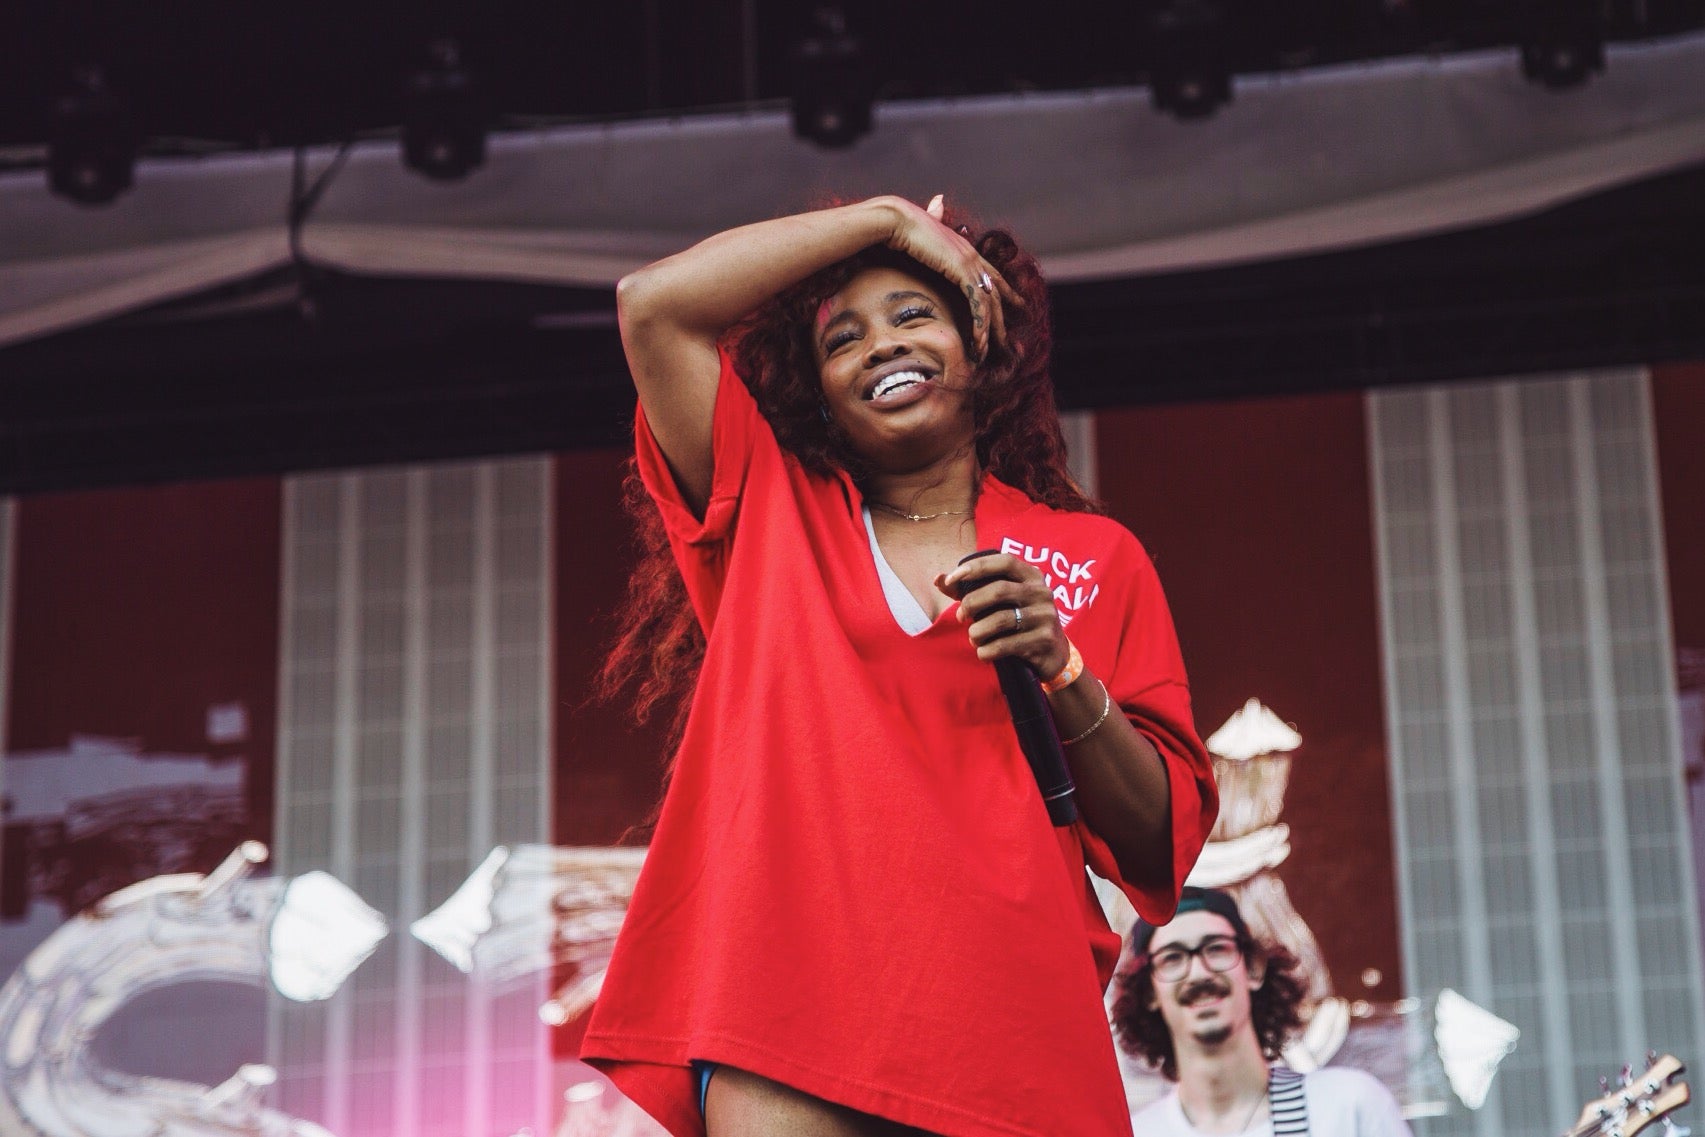 EXCLUSIVE: SZA Spills When Fans Can Expect Her New Album, Talks Self Love
